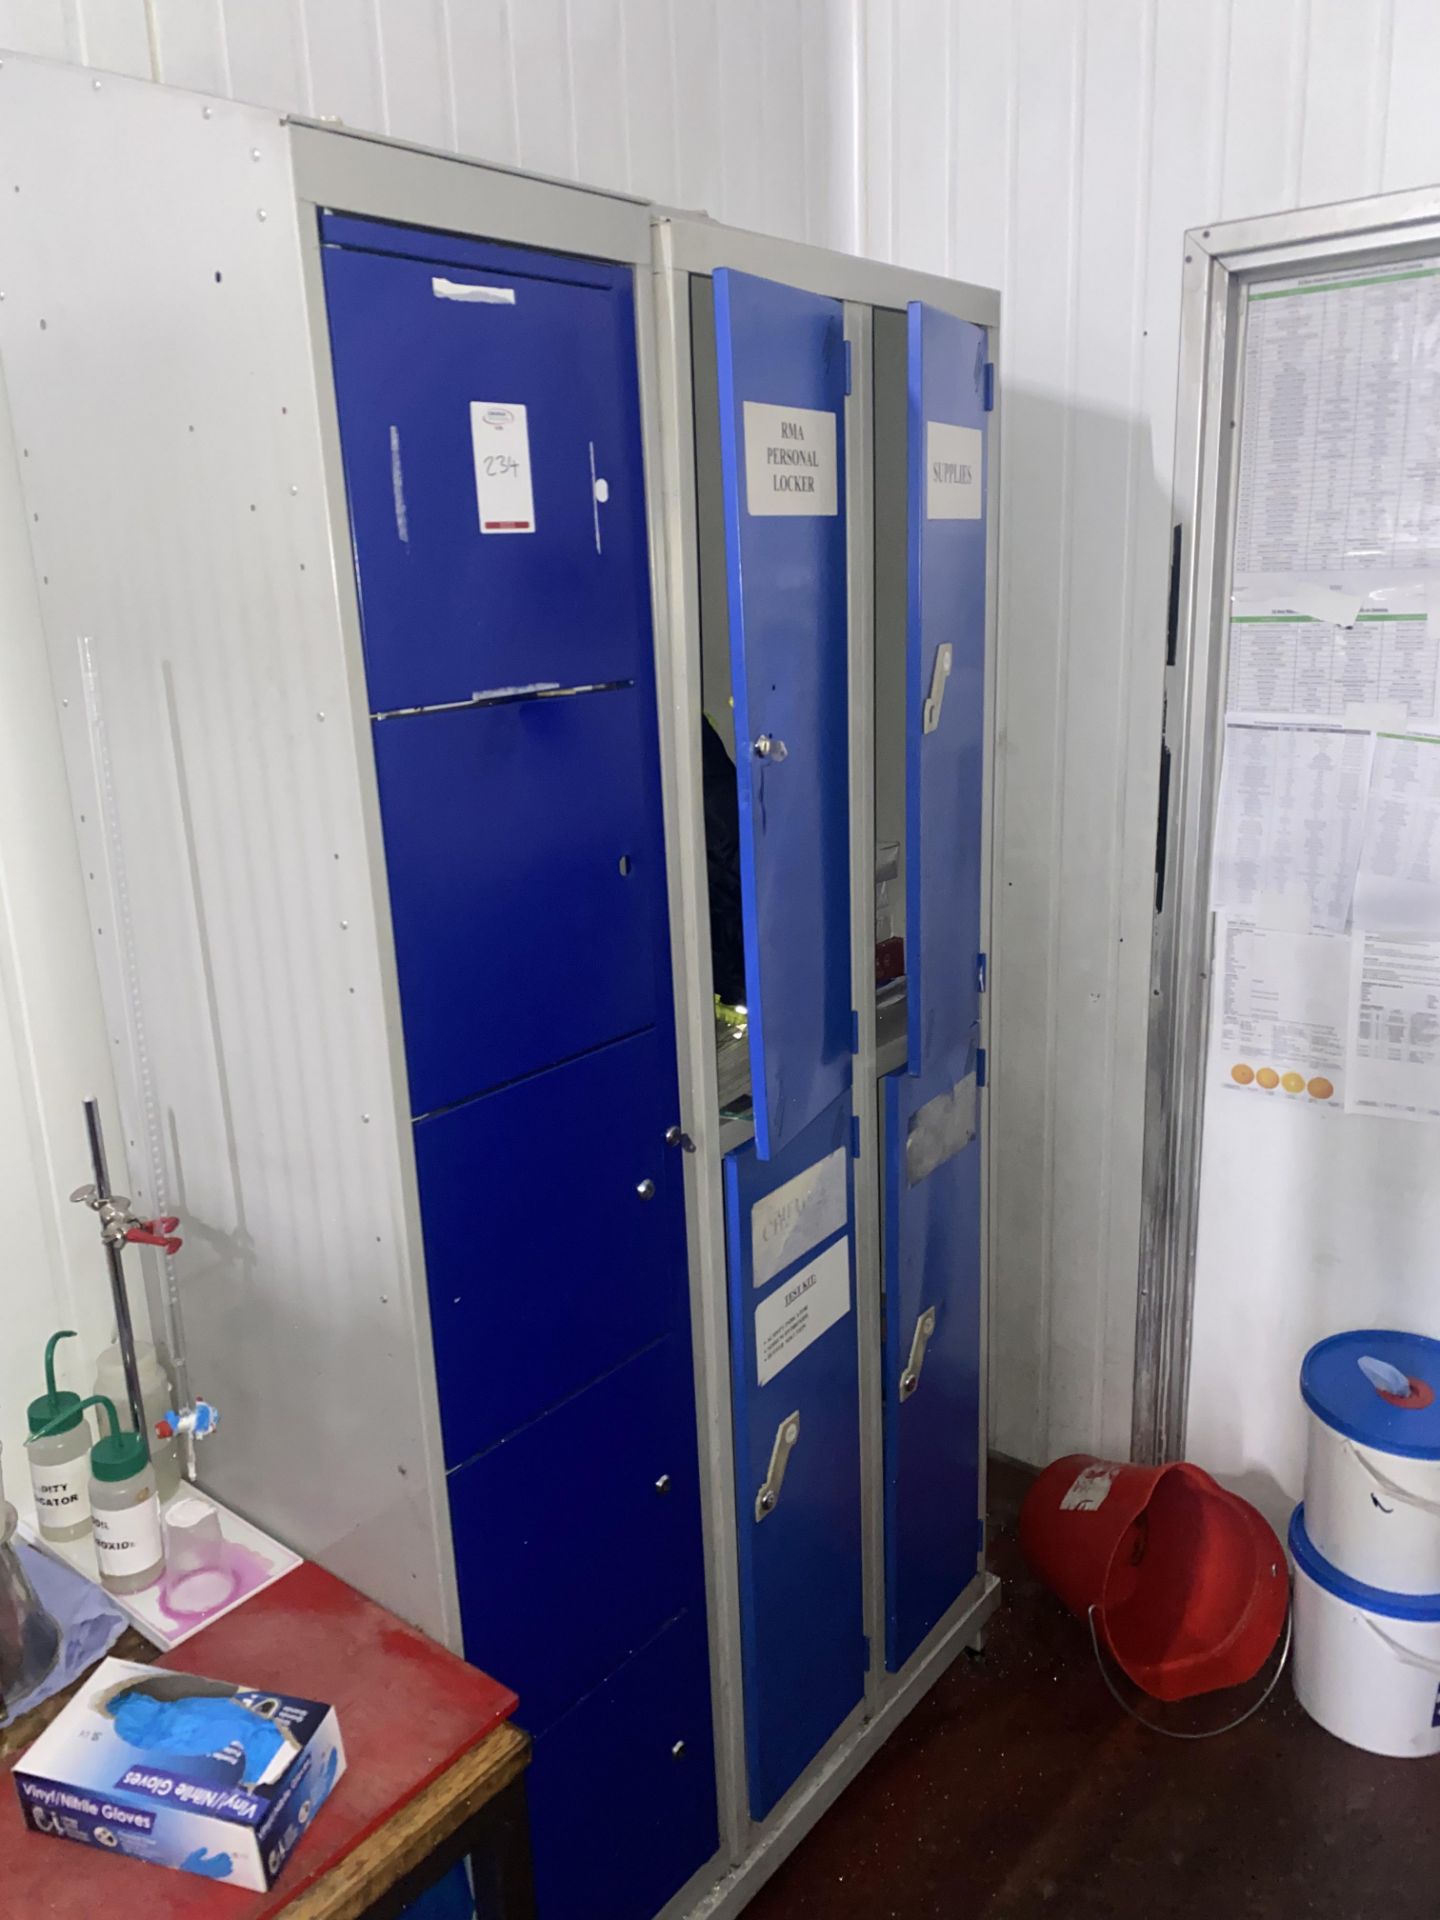 Stainless steel preparation bench , 3 locker units and 2 chairs (located in Factory 1)